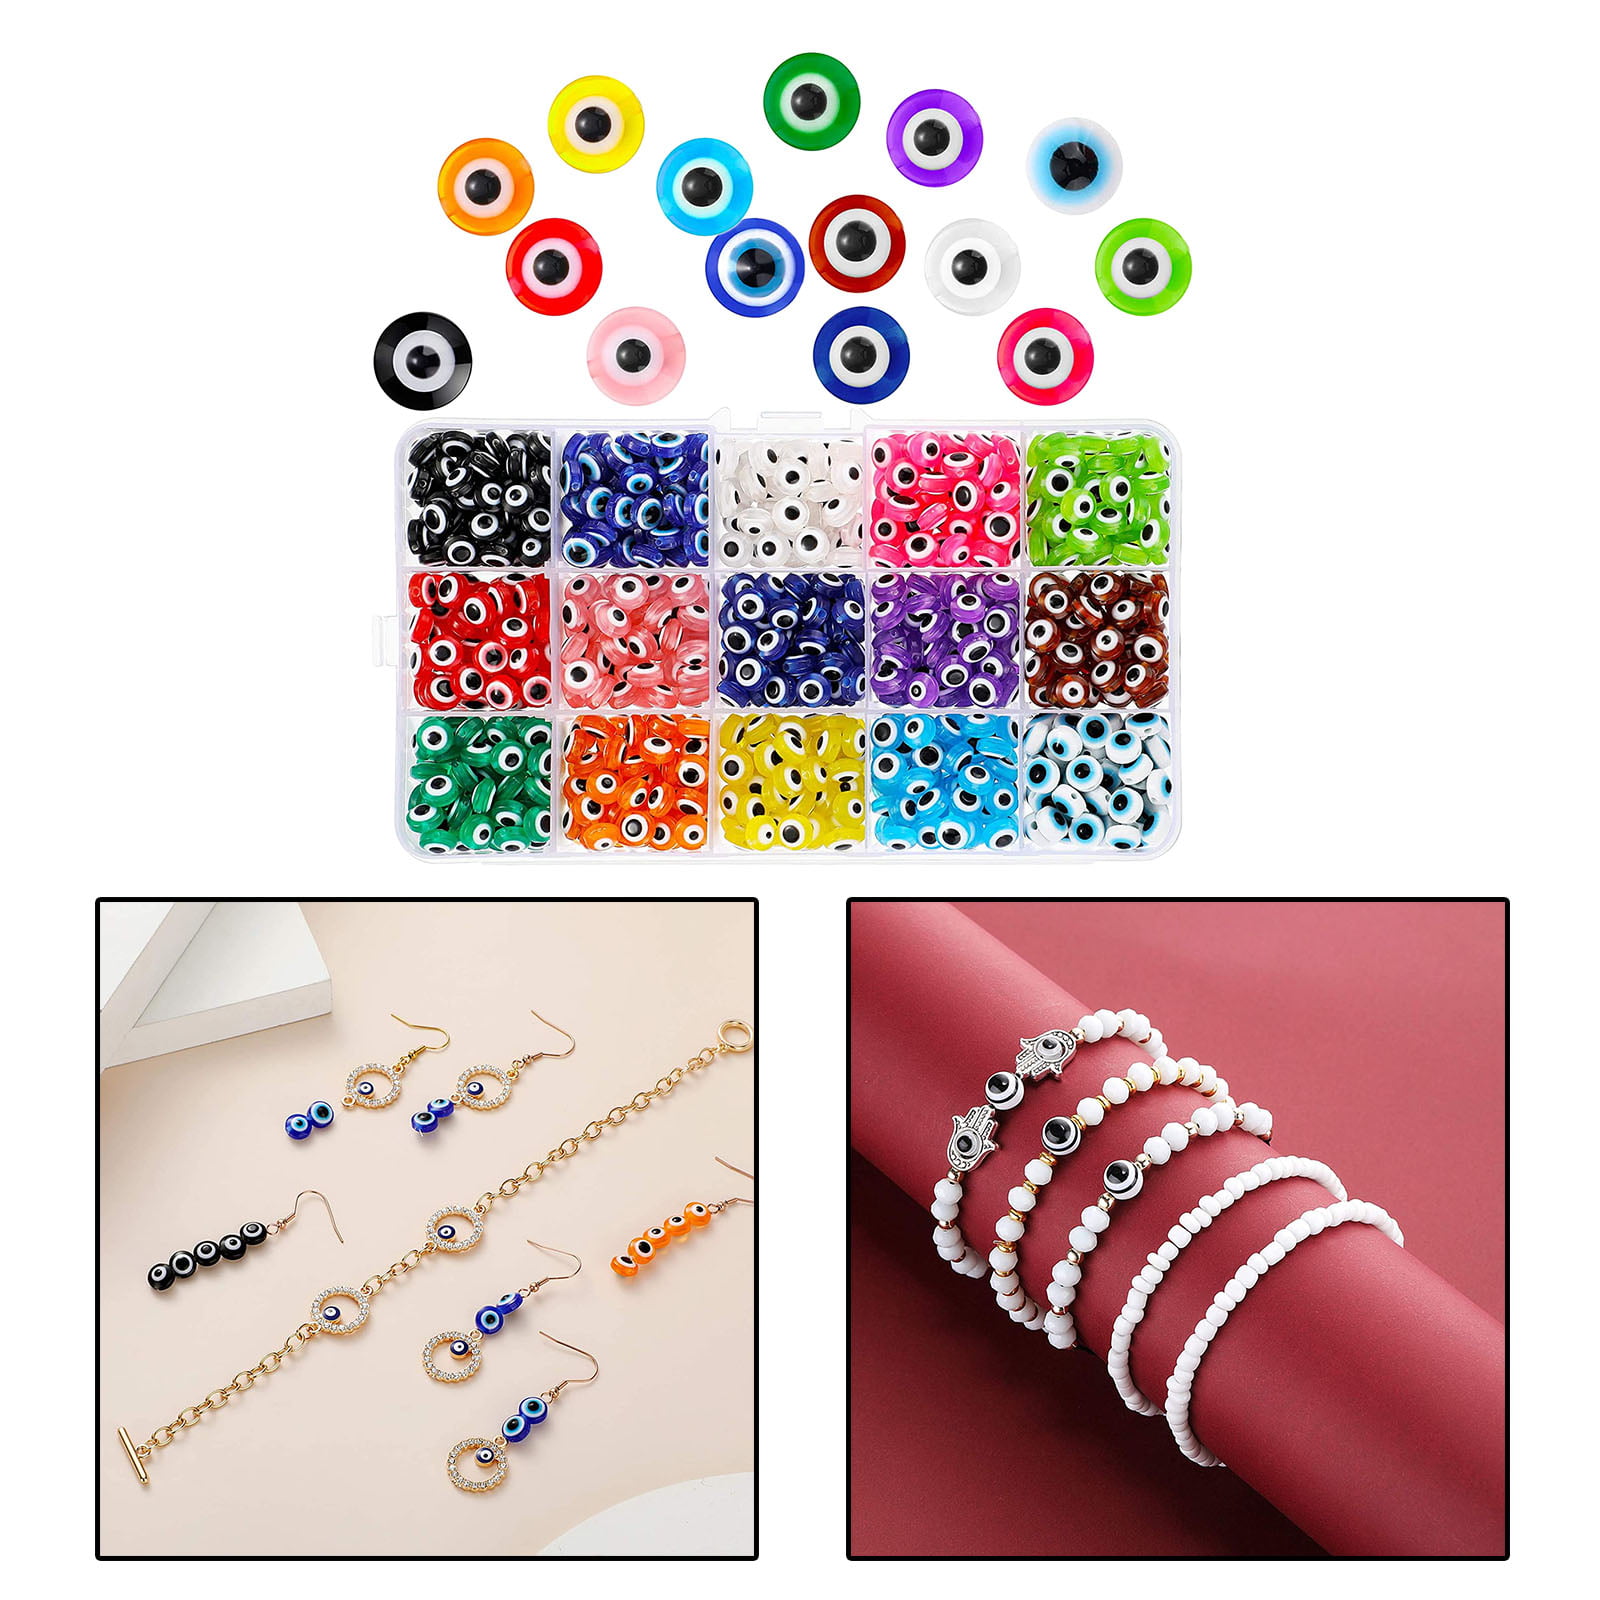 10x19mm Evil Eye Small Mola Fish Ceramic Beads For Jewelry Making  Multicolor Spacer Bricks For Necklaces And Bracelets From Tyawr, $28.59